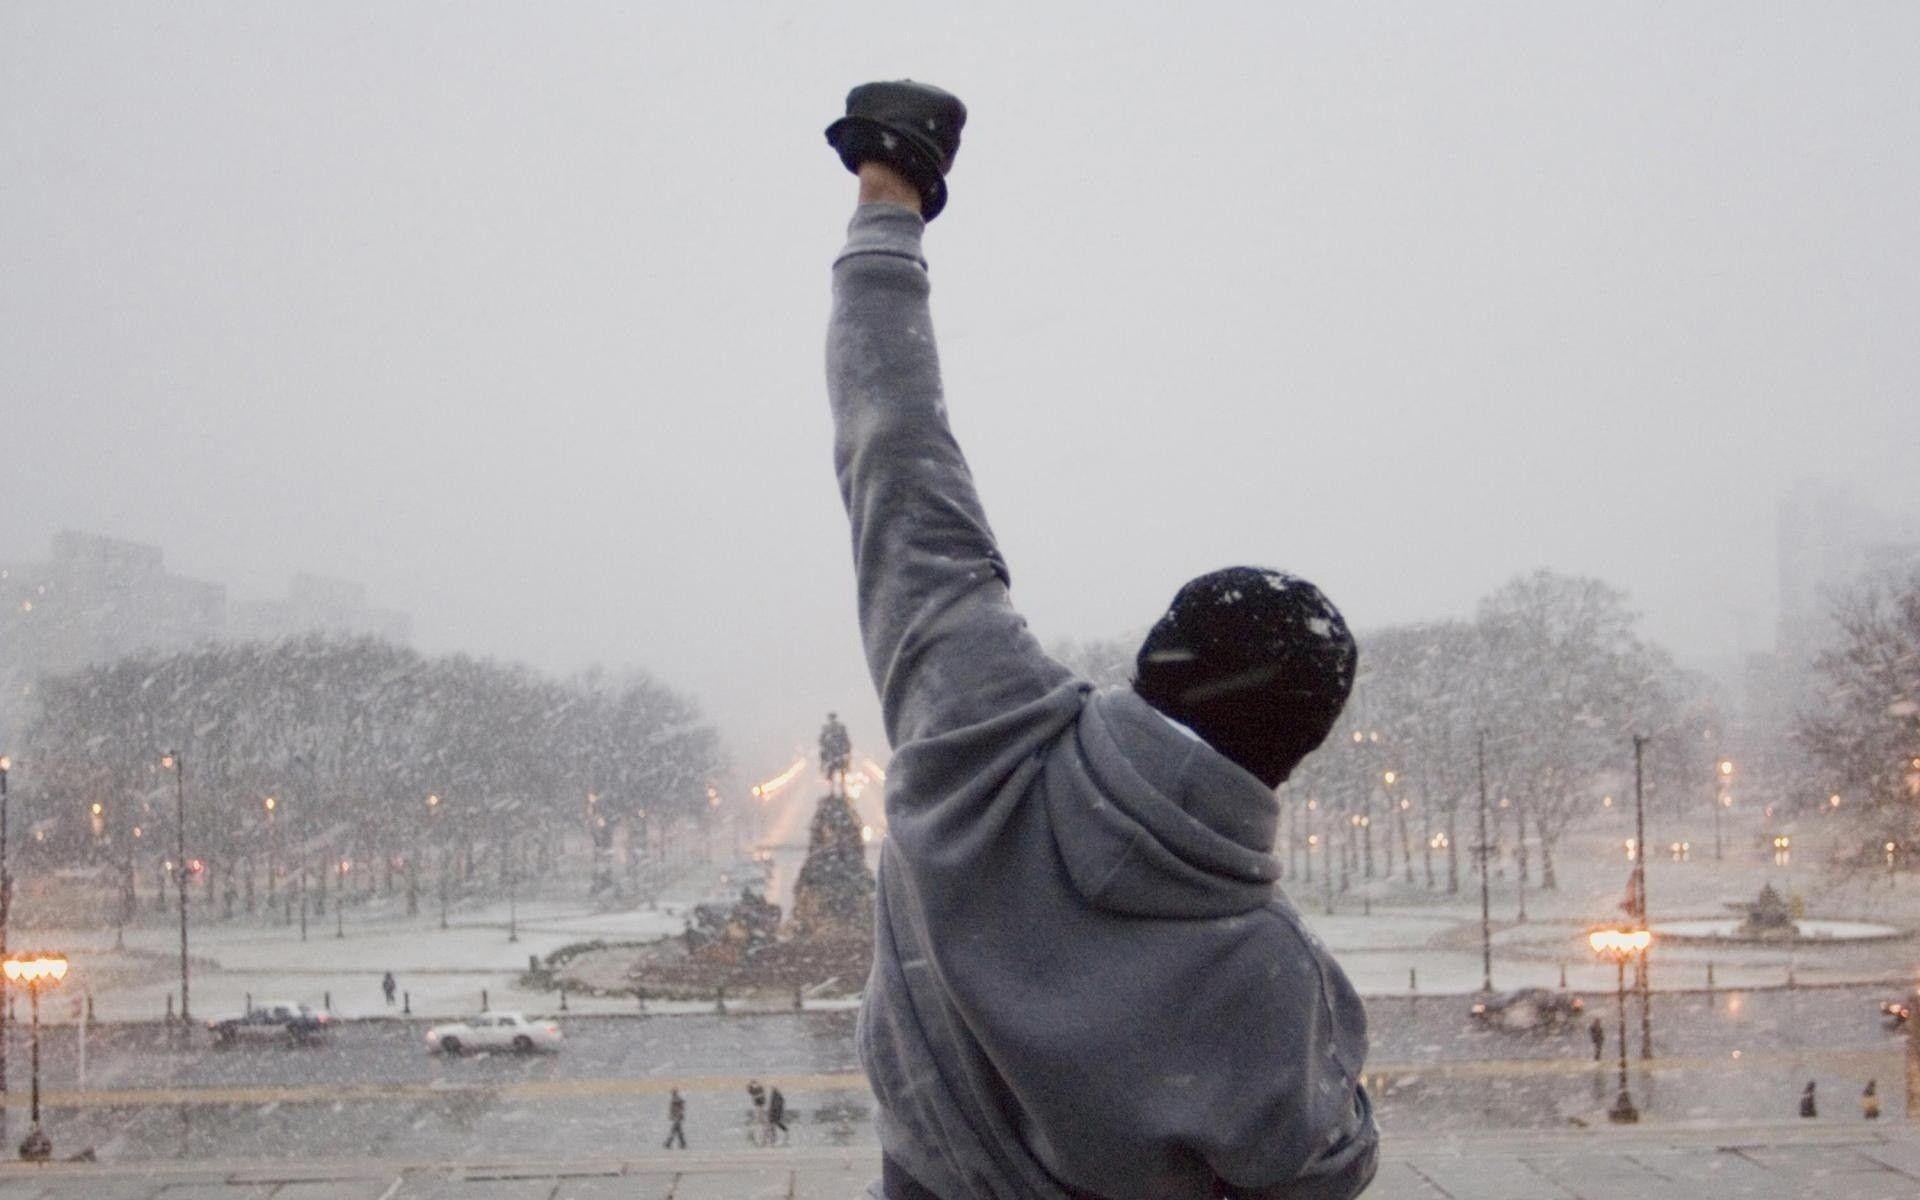 Rocky Balboa wallpaper wallpaper by Eythenisagod  Download on ZEDGE  755a